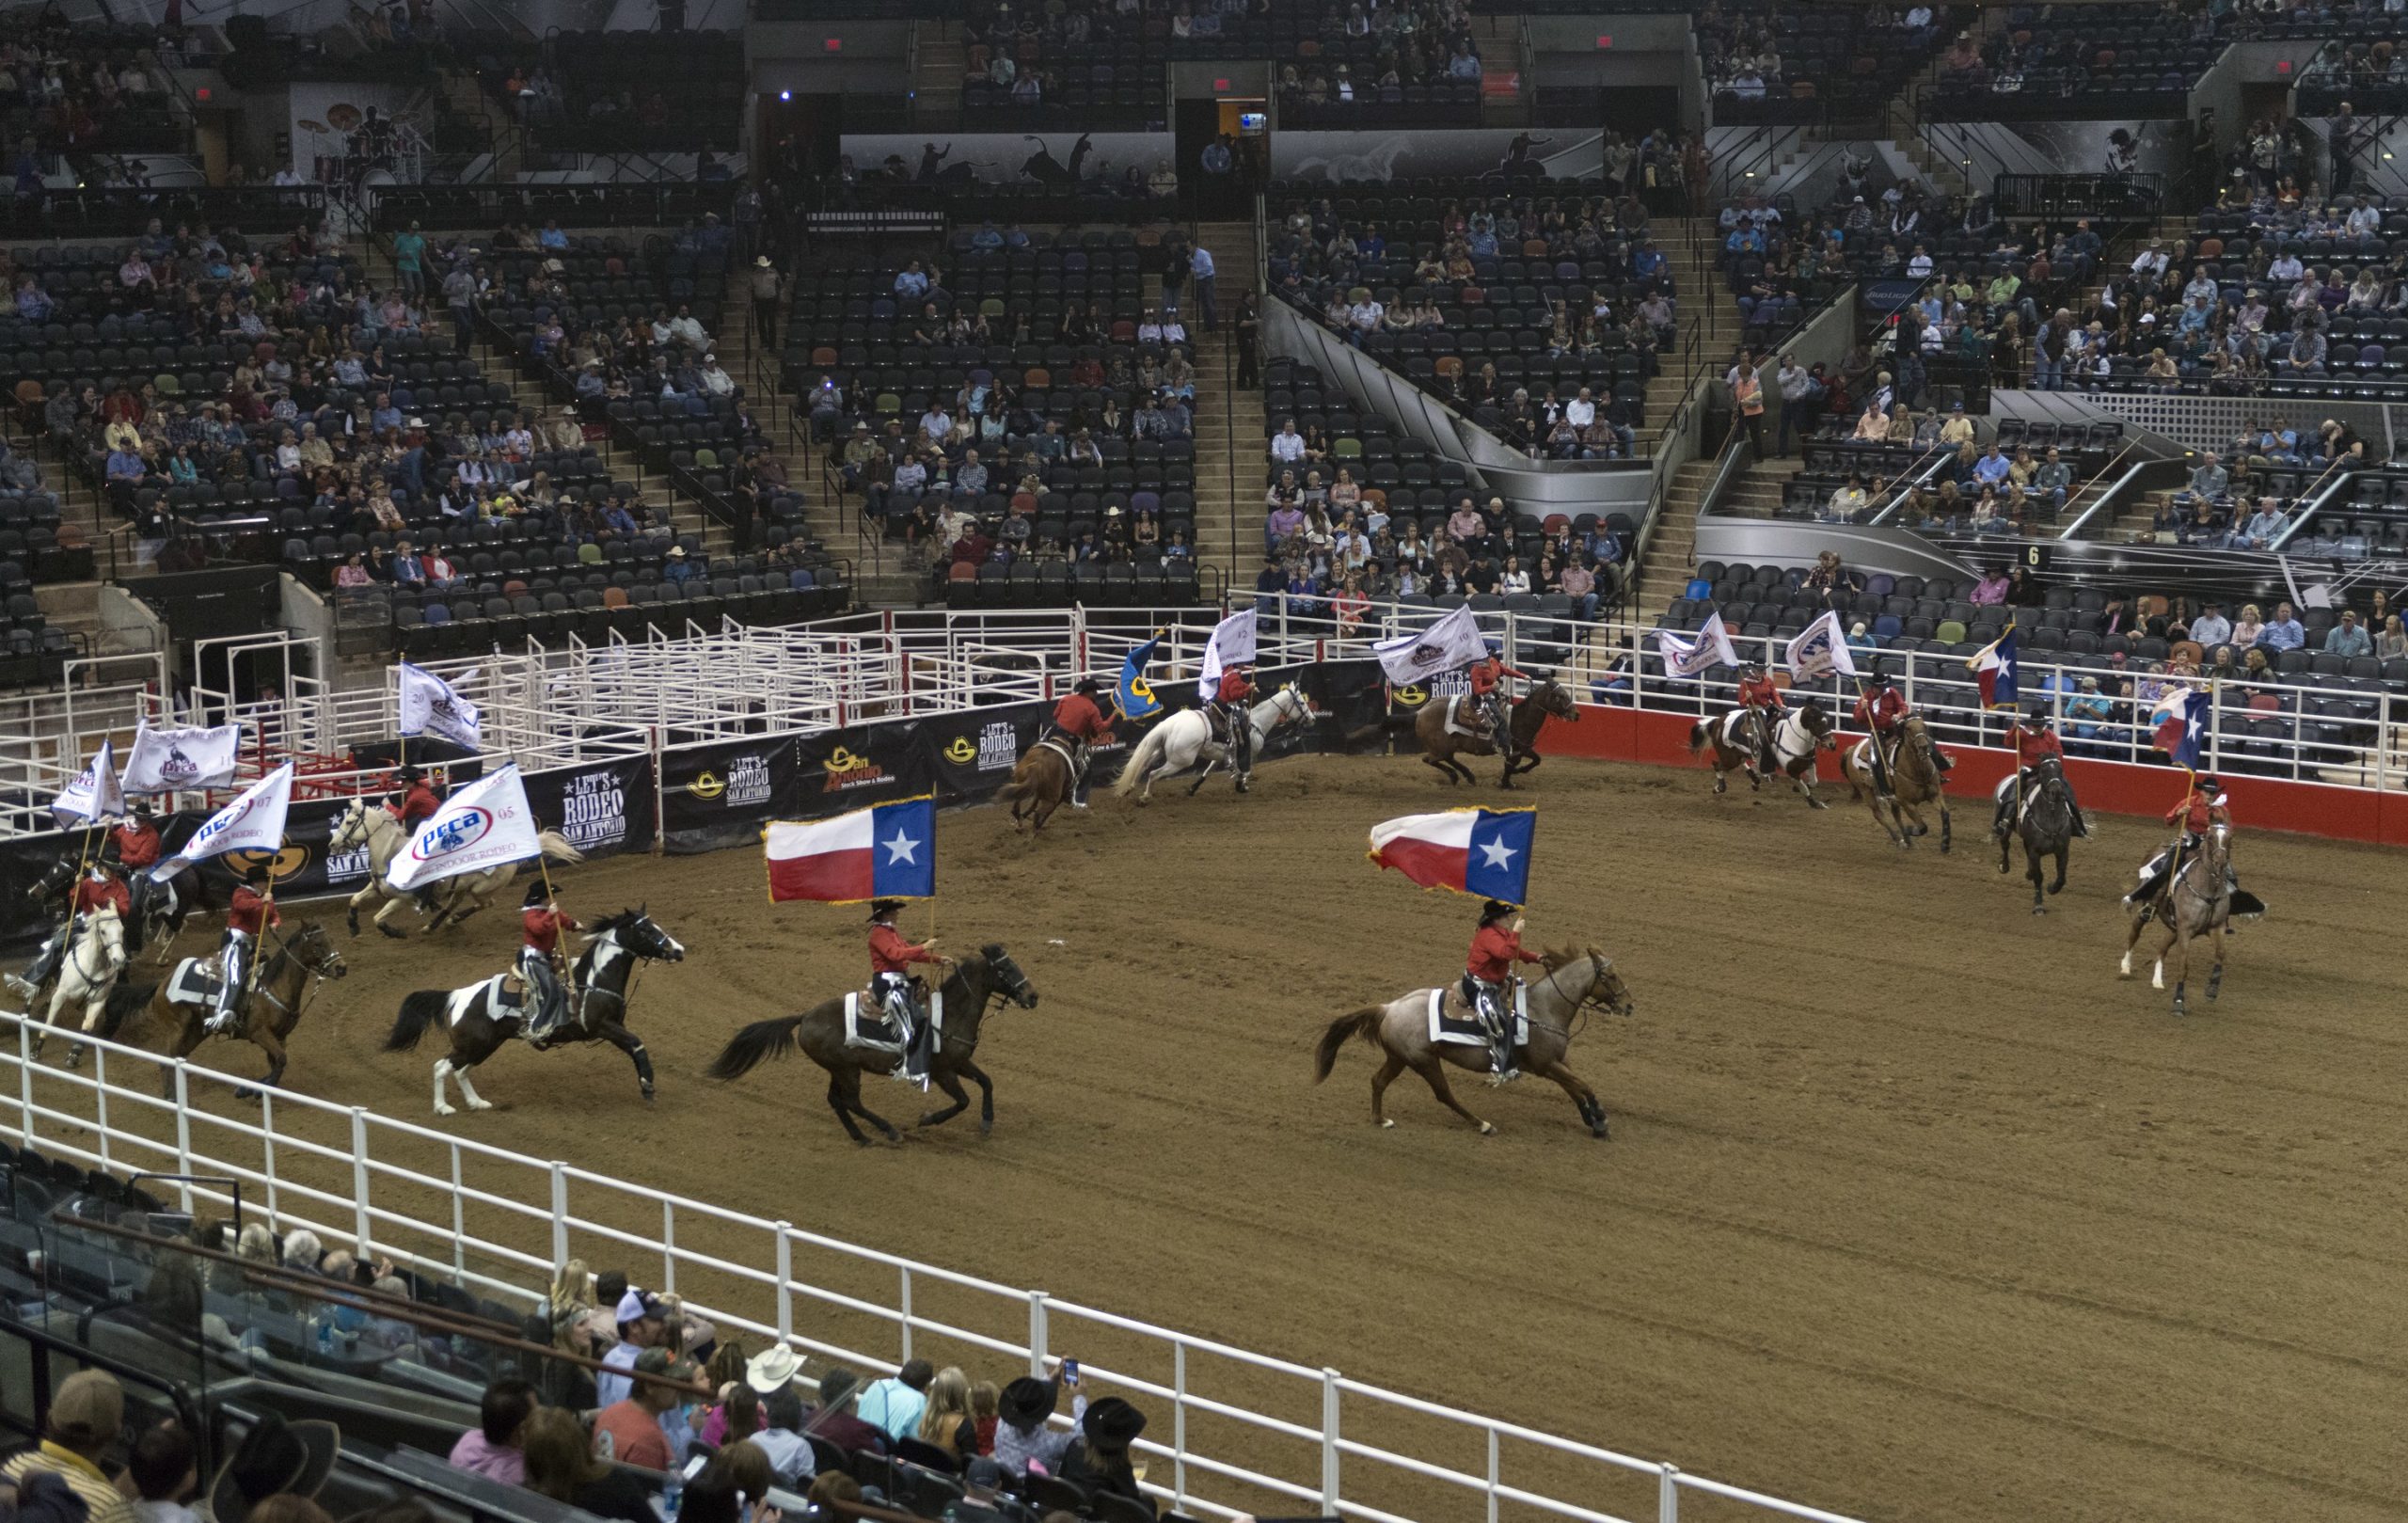 Here is a picture of some Bronc Riders at the Rodeo, waving Texan flags. A large crowd is watching and cheering,